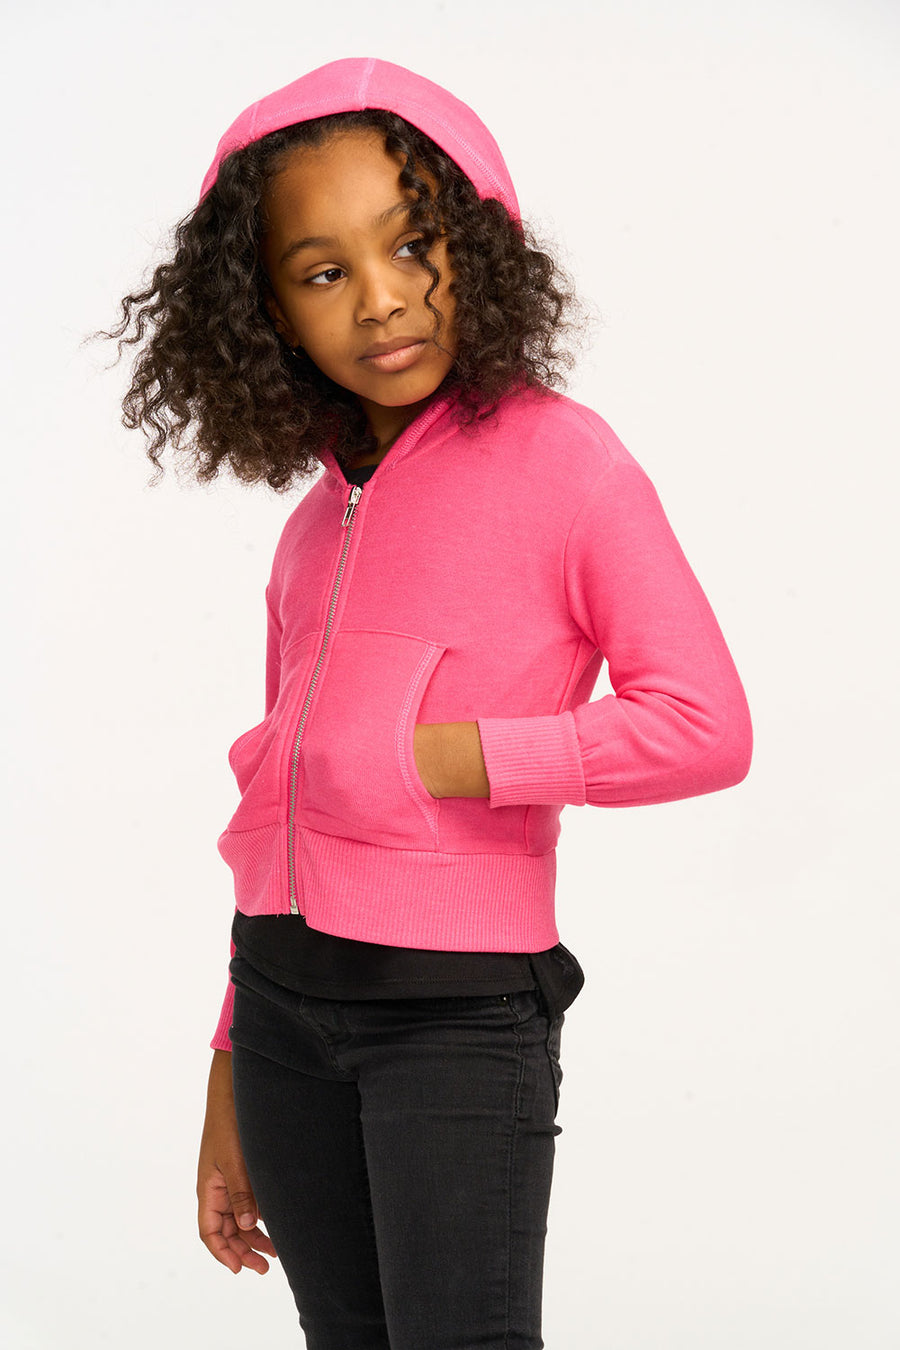 Puffy Flamingo Pink Cozy Knit Zip Up Hoodie GIRLS chaserbrand